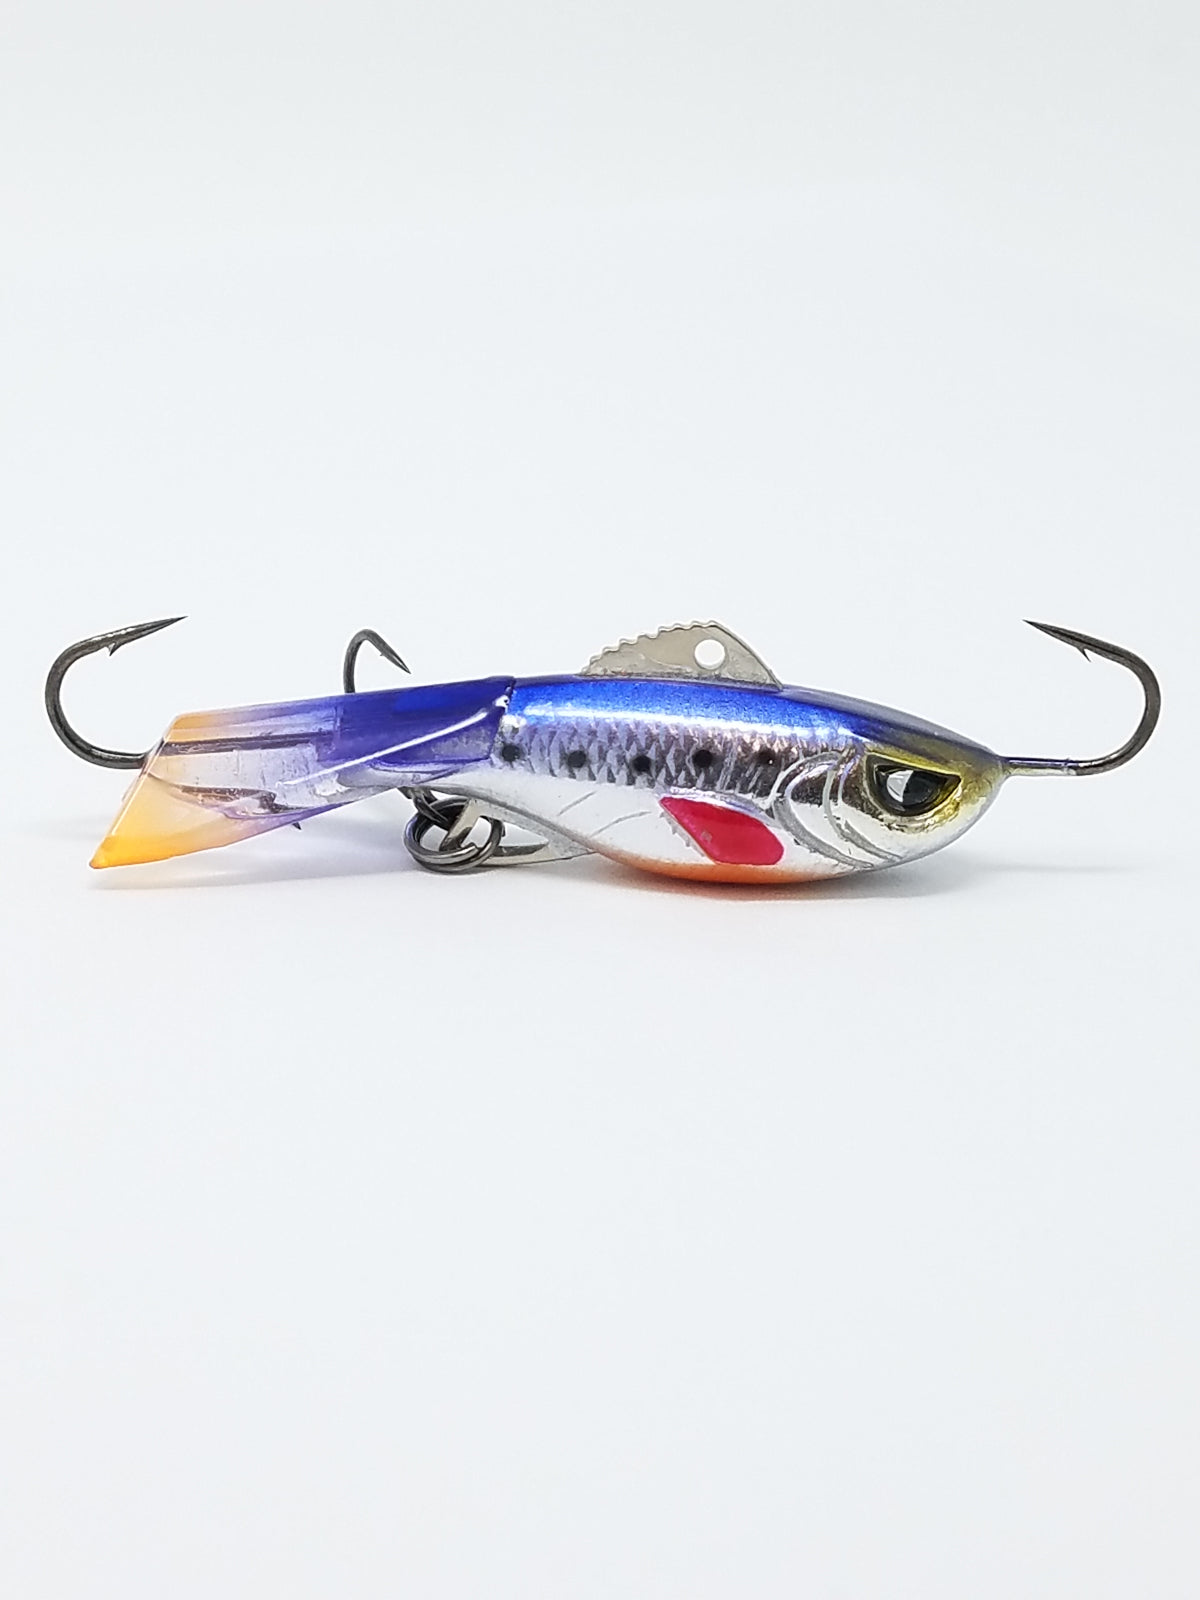 Acme Tackle Company Hyper-Rattle Jigging Lure, Glow Perch, 2 